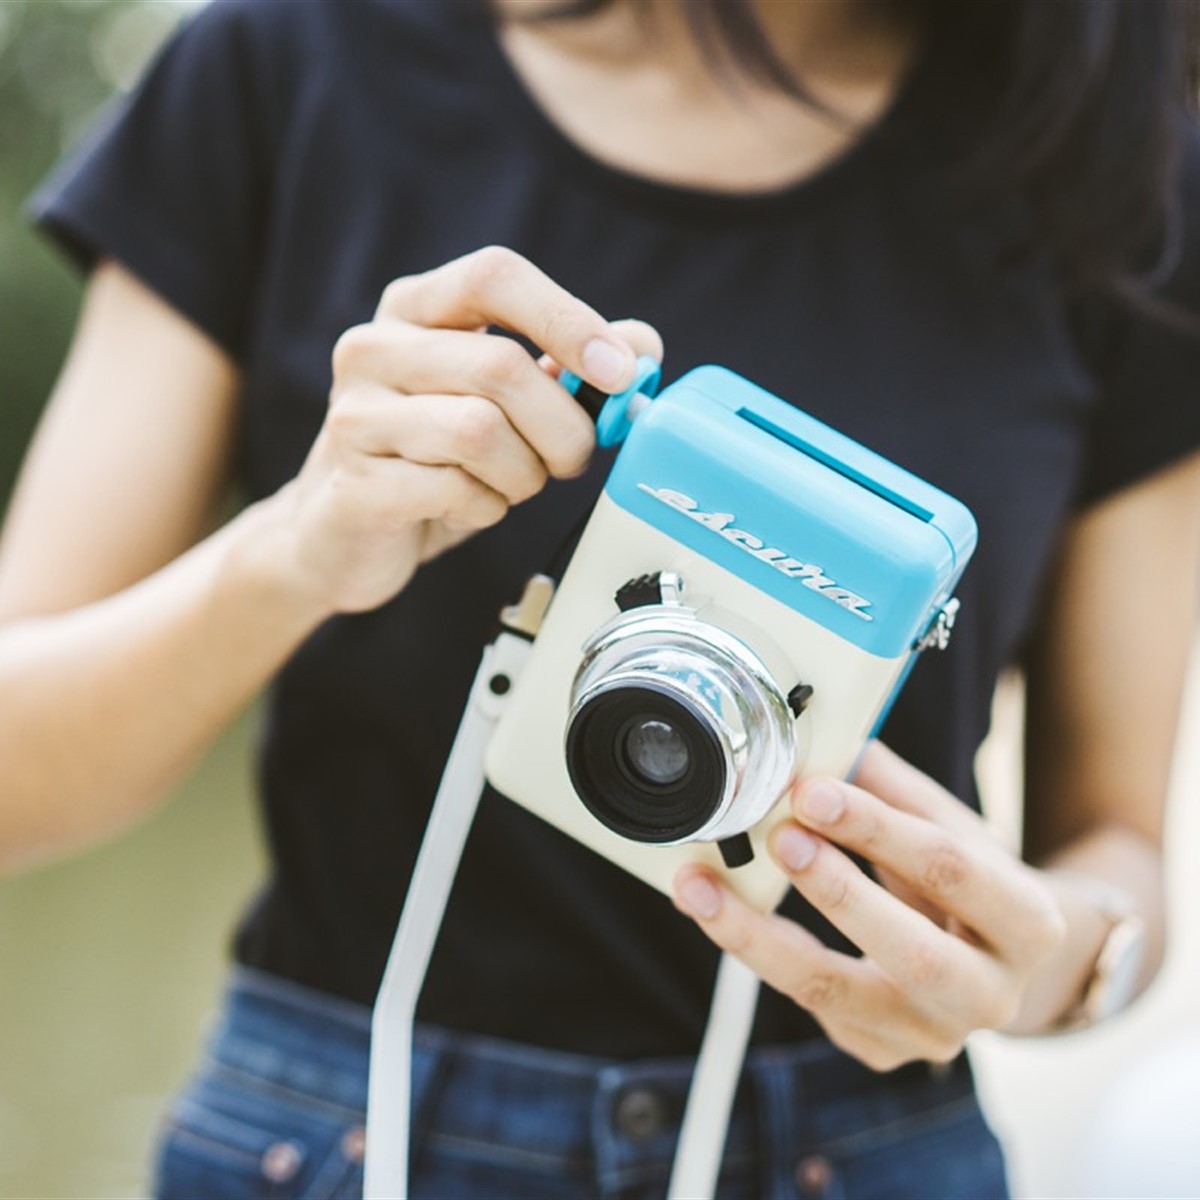 Escura Instant 60s Is A Retro Inspired Instant Camera That Doesn't Need Batteries: Digital Photography Review